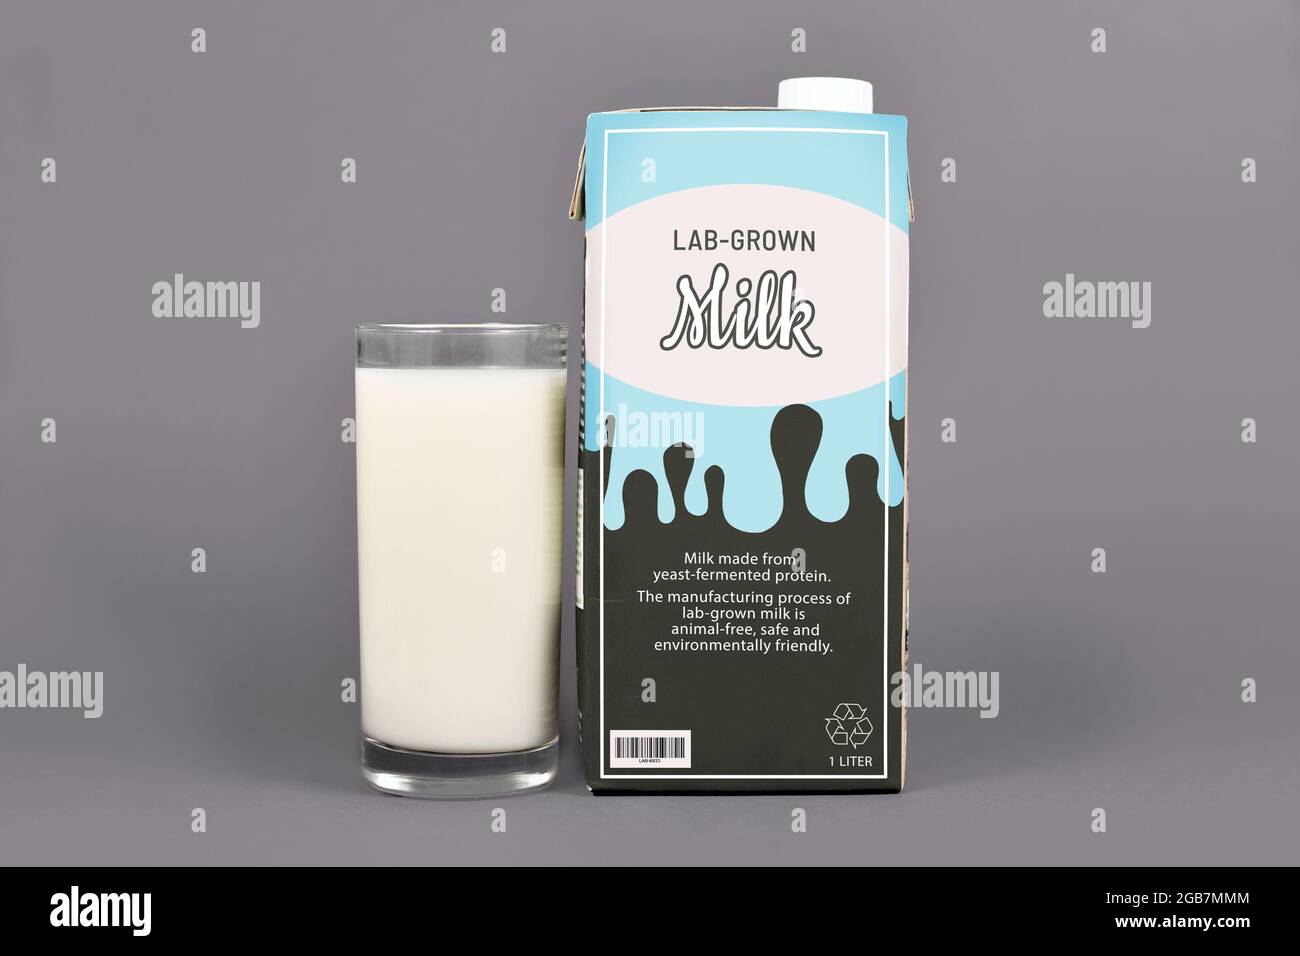 Lab grown milk concept for artificial cultured dairy production from reproduced milk proteins with carton with made up label Stock Photo